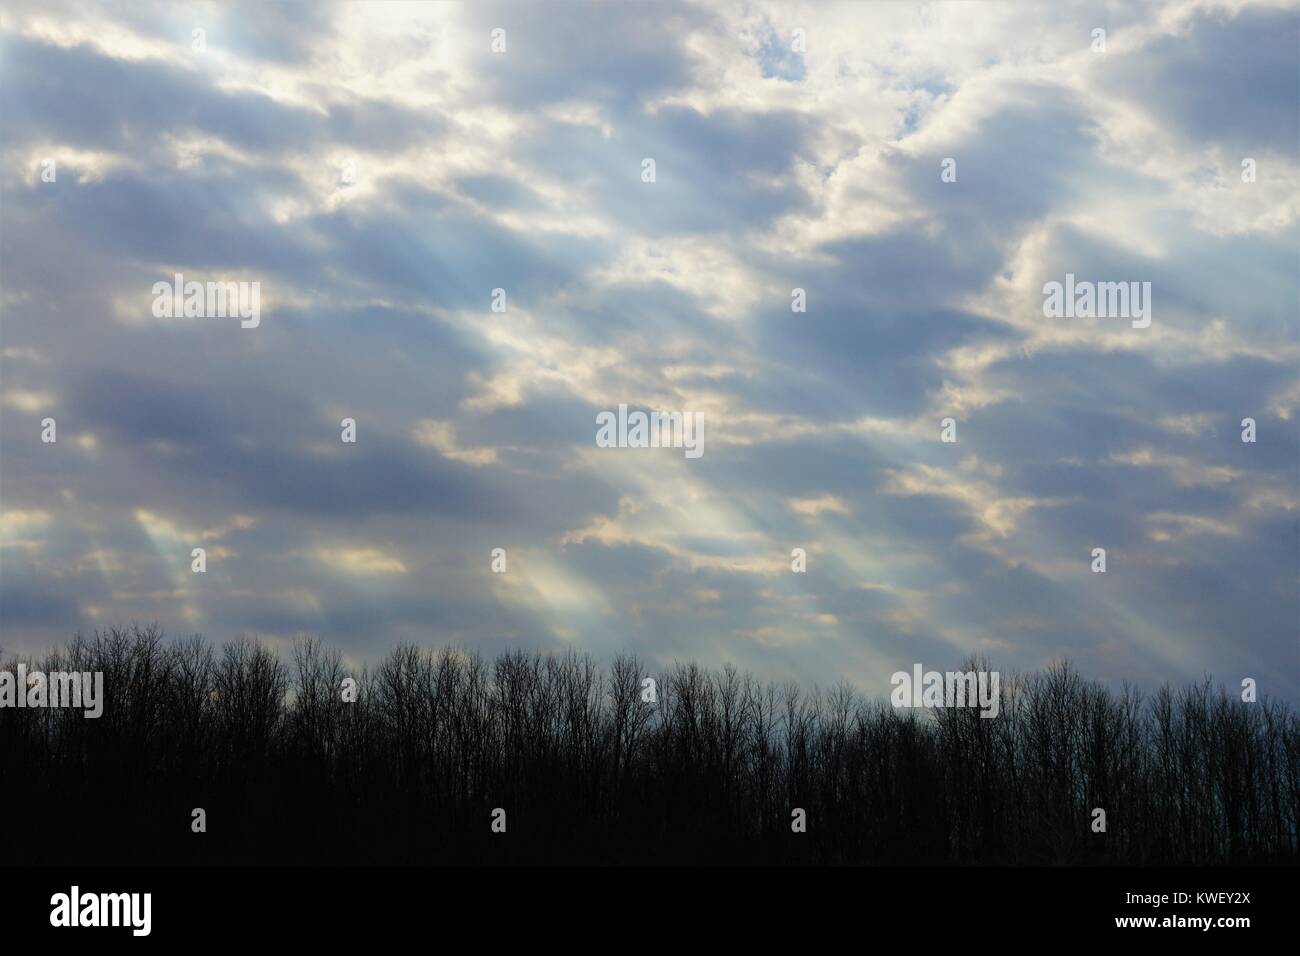 The Heavens Declare the Glory of God Stock Photo